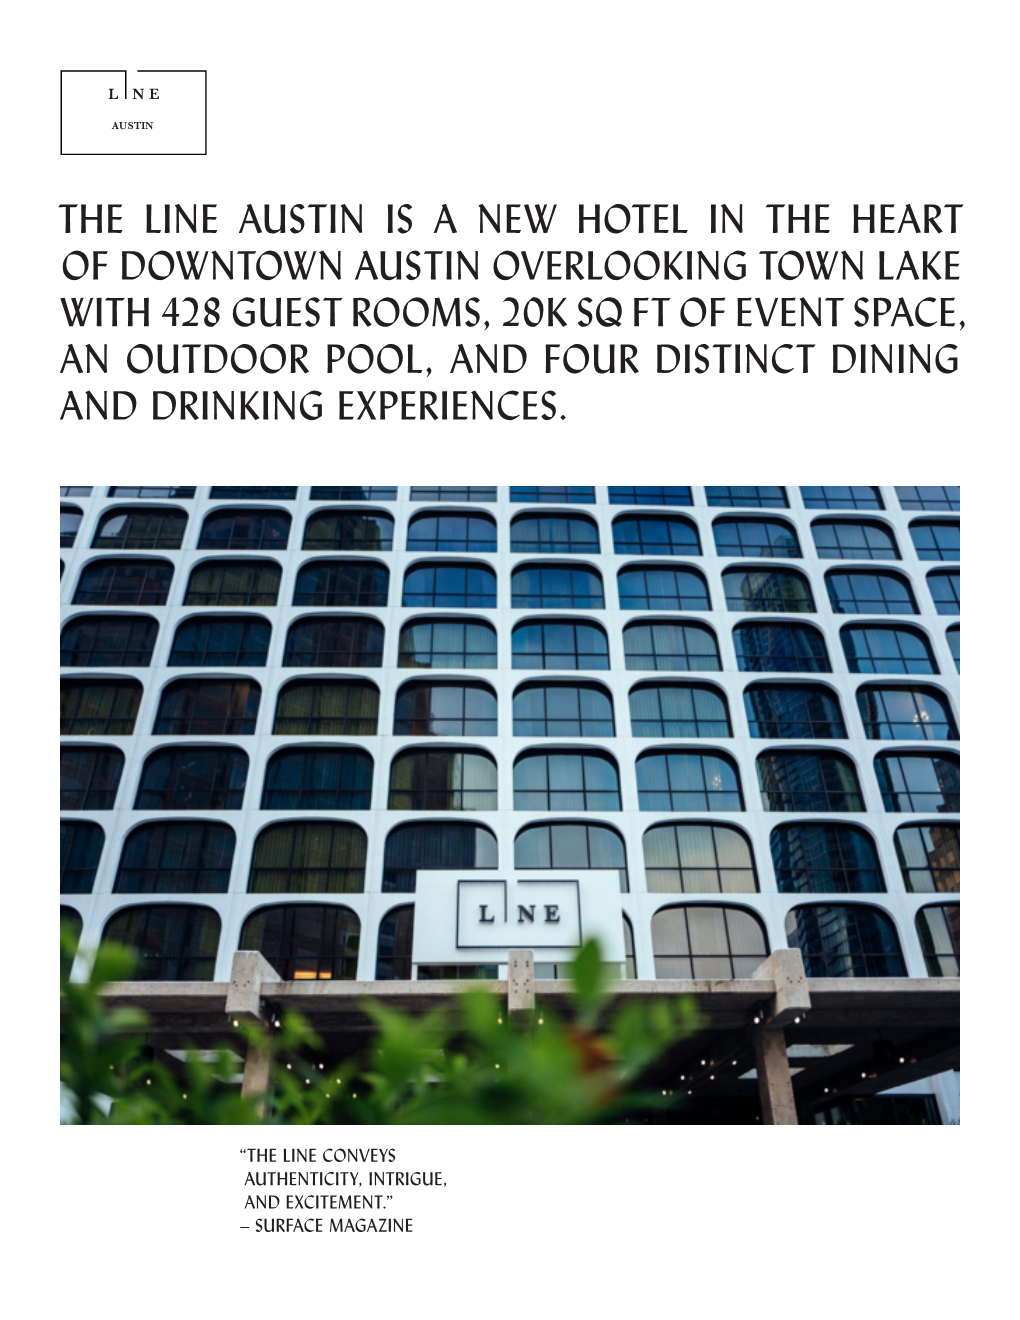 The Line Austin Is a New Hotel in the Heart of Downtown